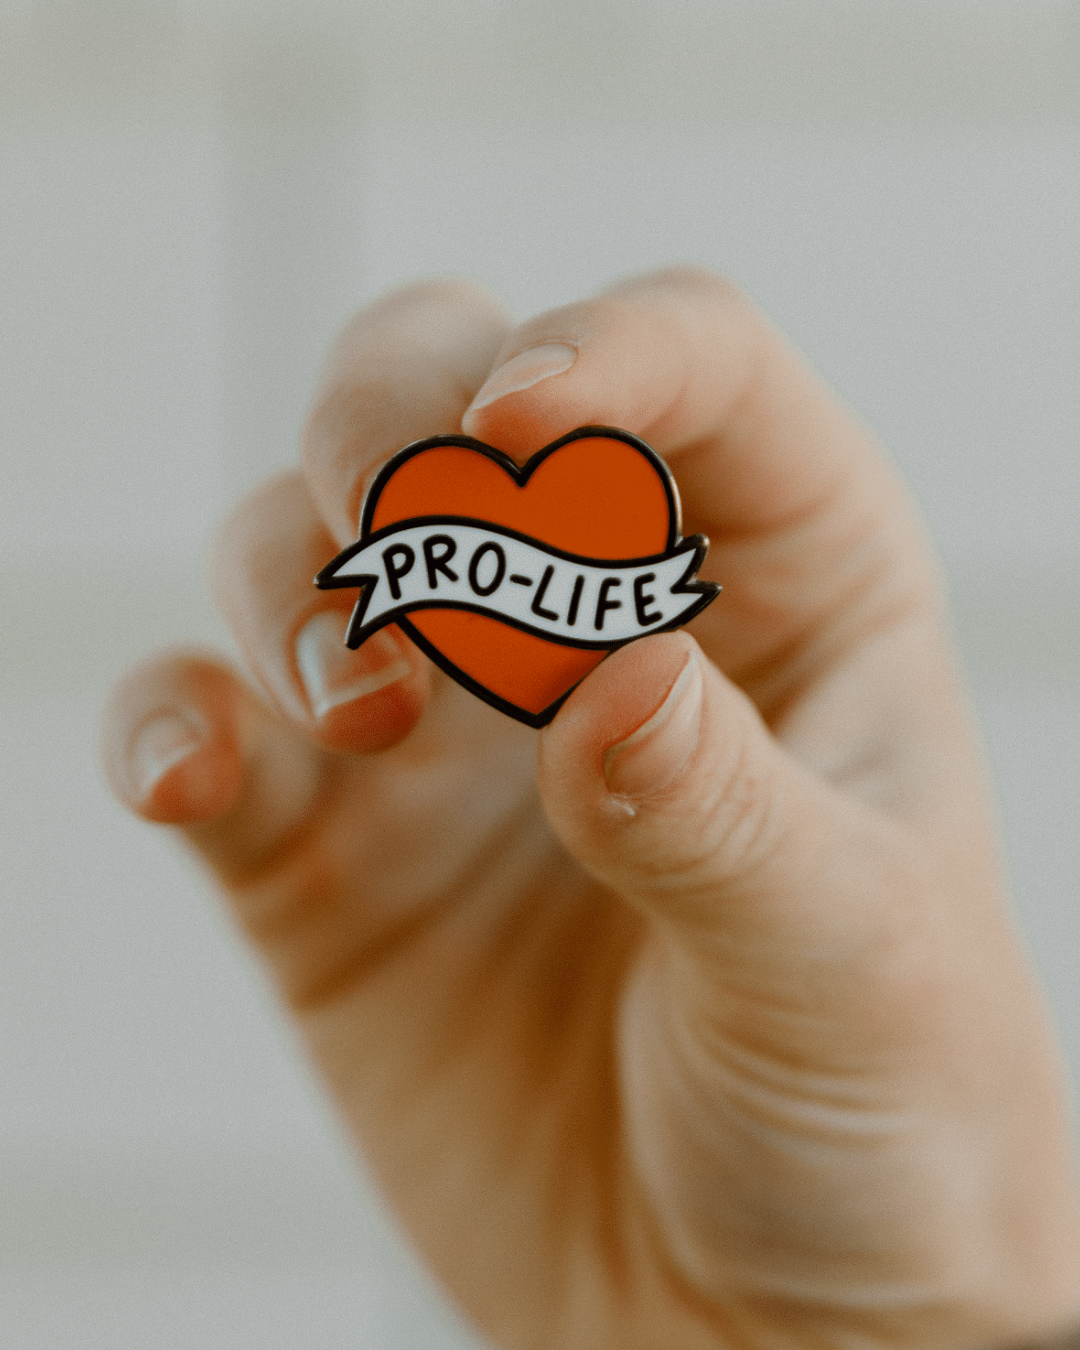 American Traditional Pro-Life Heart Pin